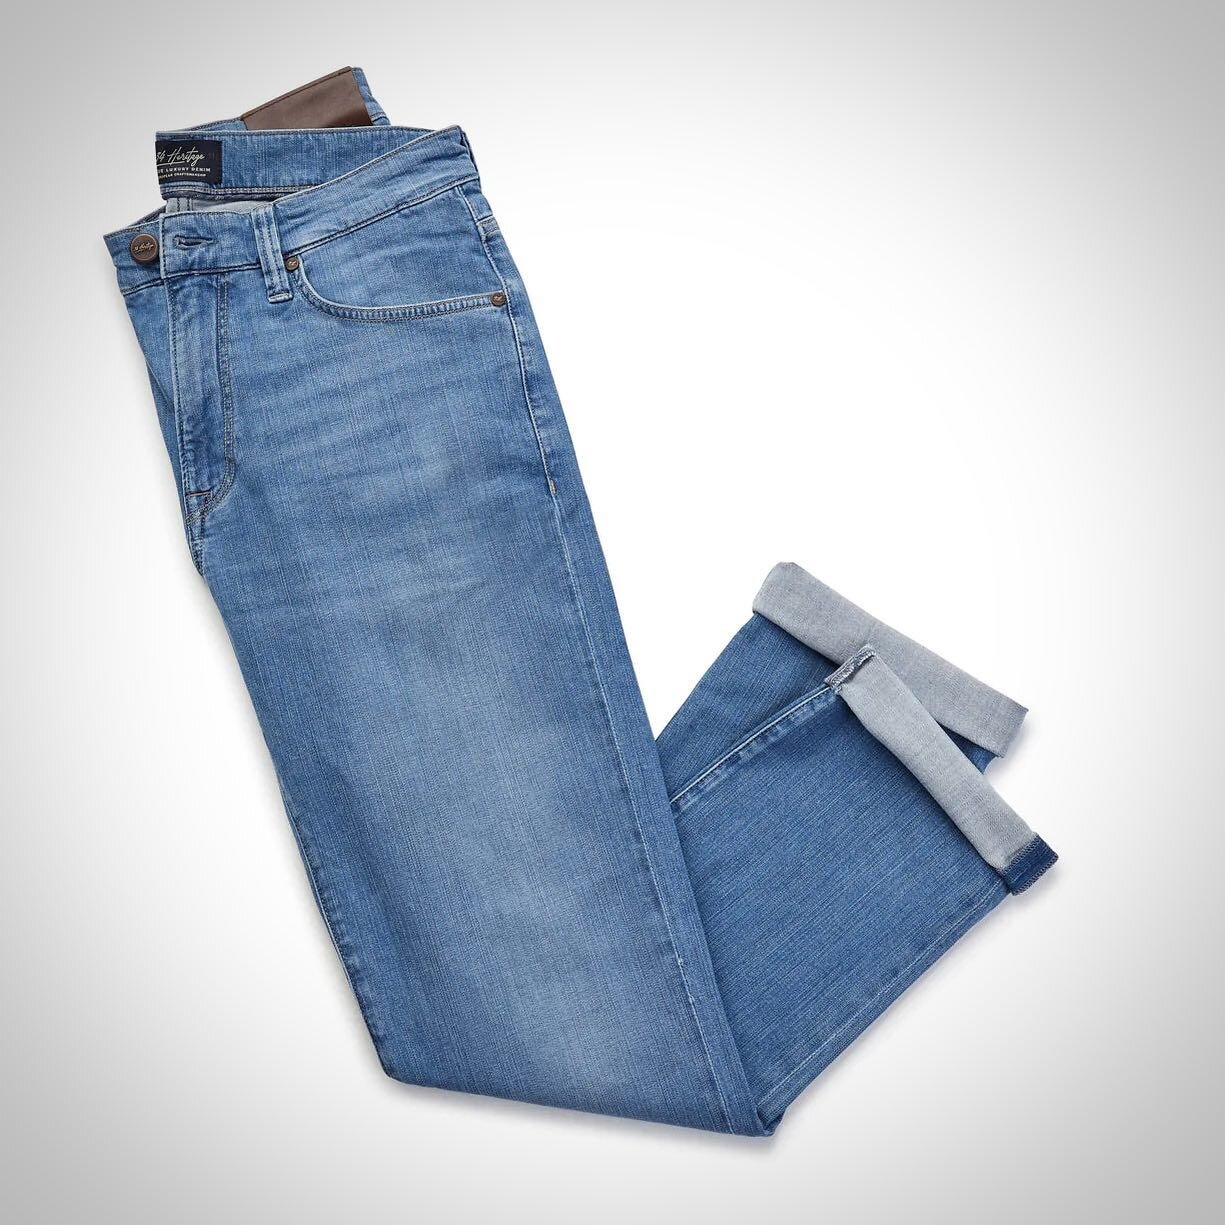 Courage in Light soft denim by @34heritage 

The quality craftsmanship and timeless style of original selvedge denim gets a comfort upgrade. 

These modern jeans have a versatile light wash and detailing of a true classic, but they&rsquo;re made from